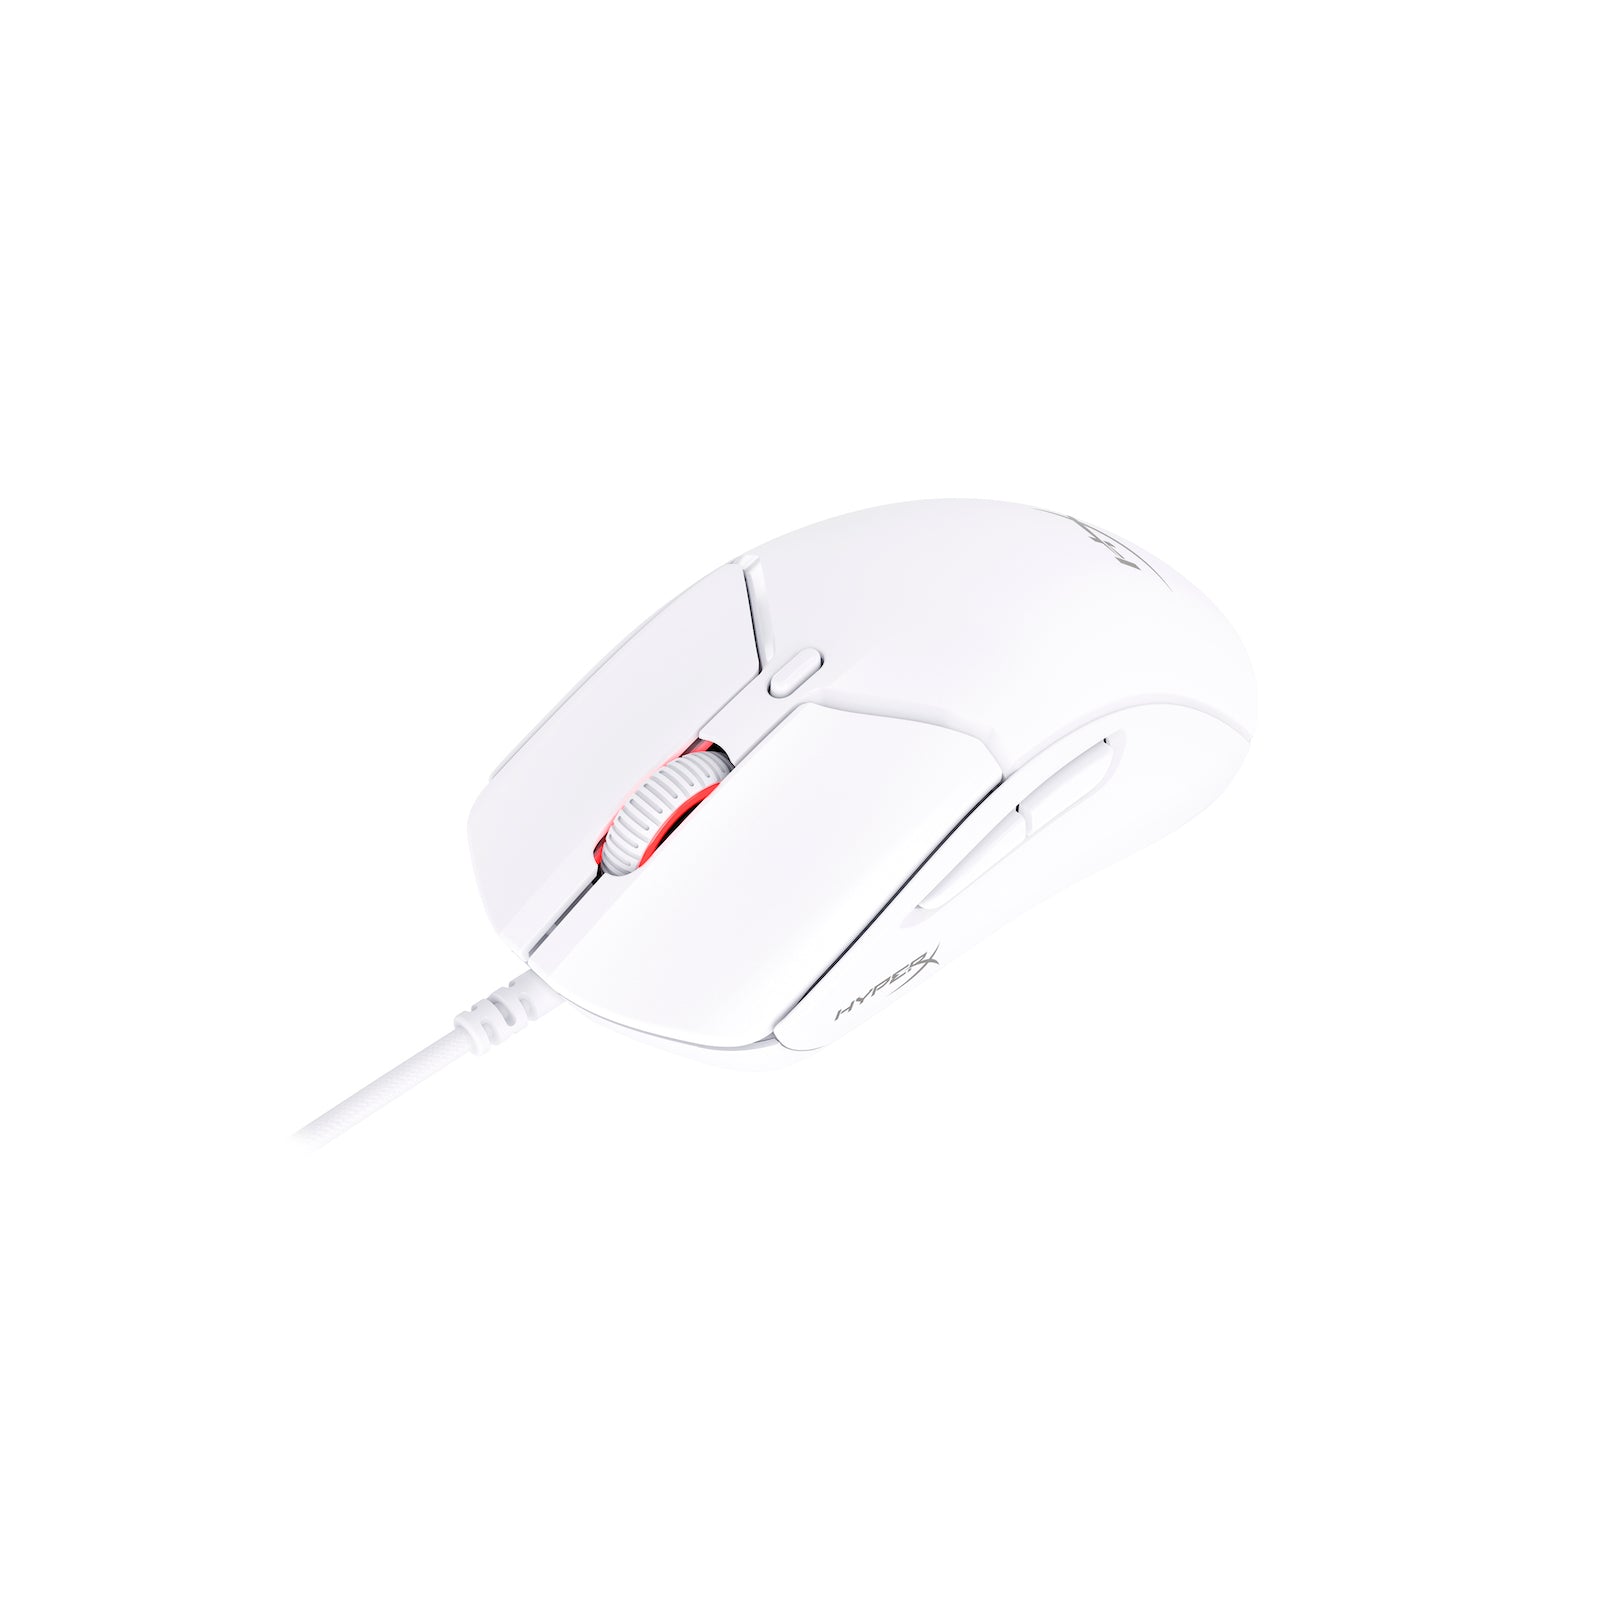 HyperX Pulsefire Haste Mouse | 2 Gaming